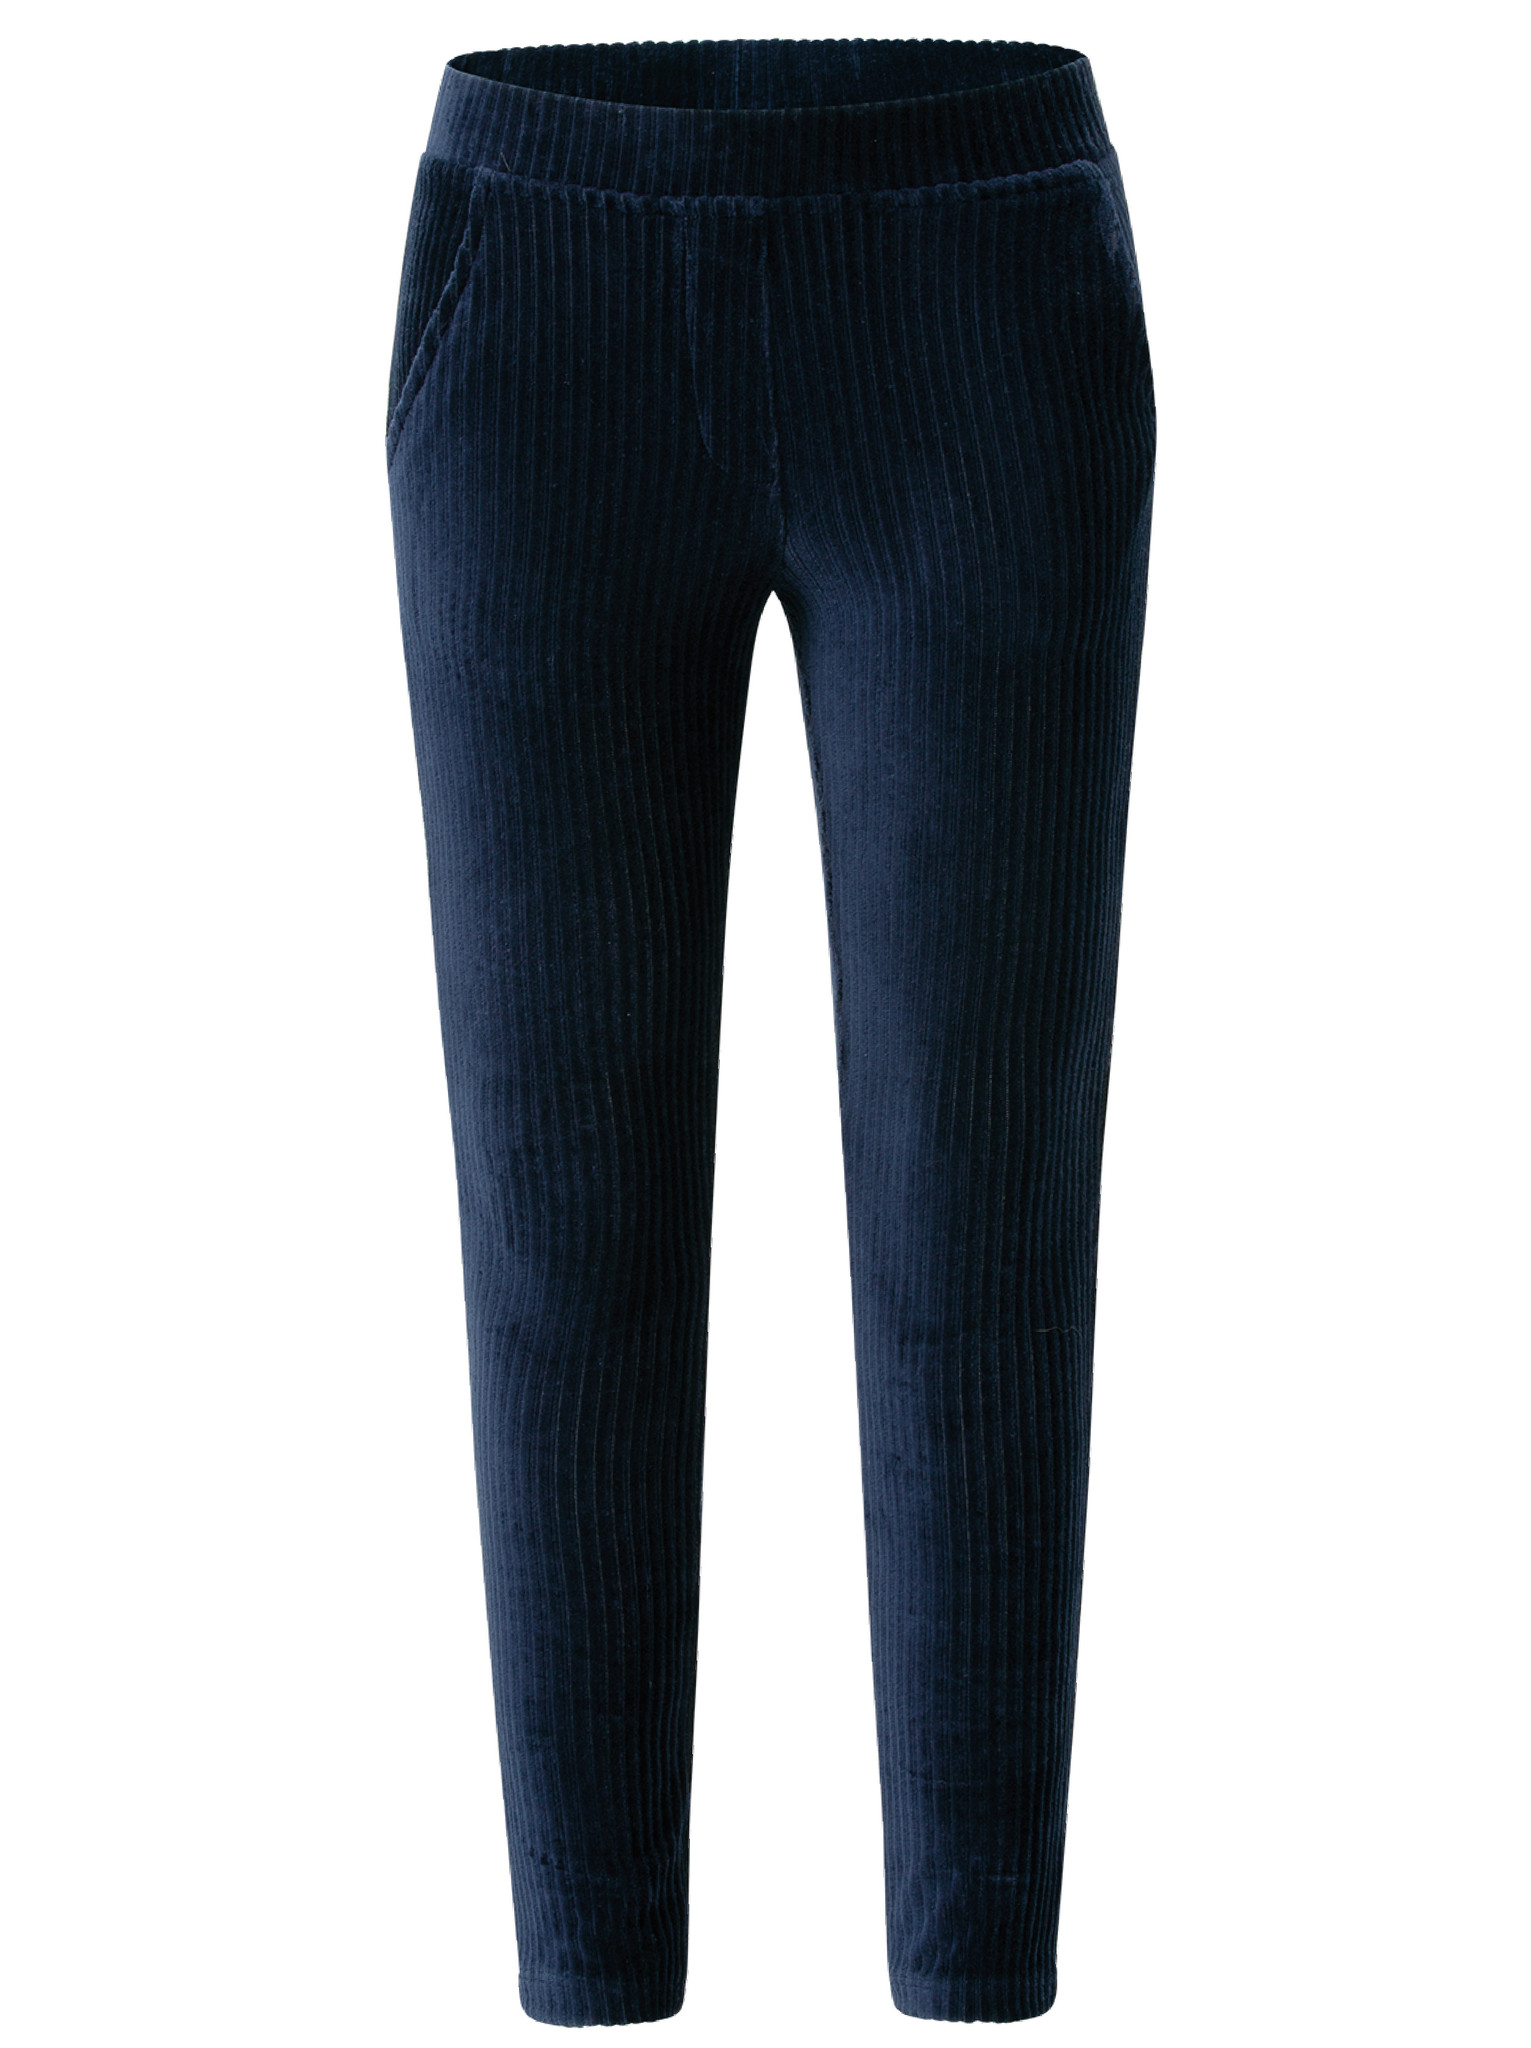 Broek Mila navy - Chaos and Order